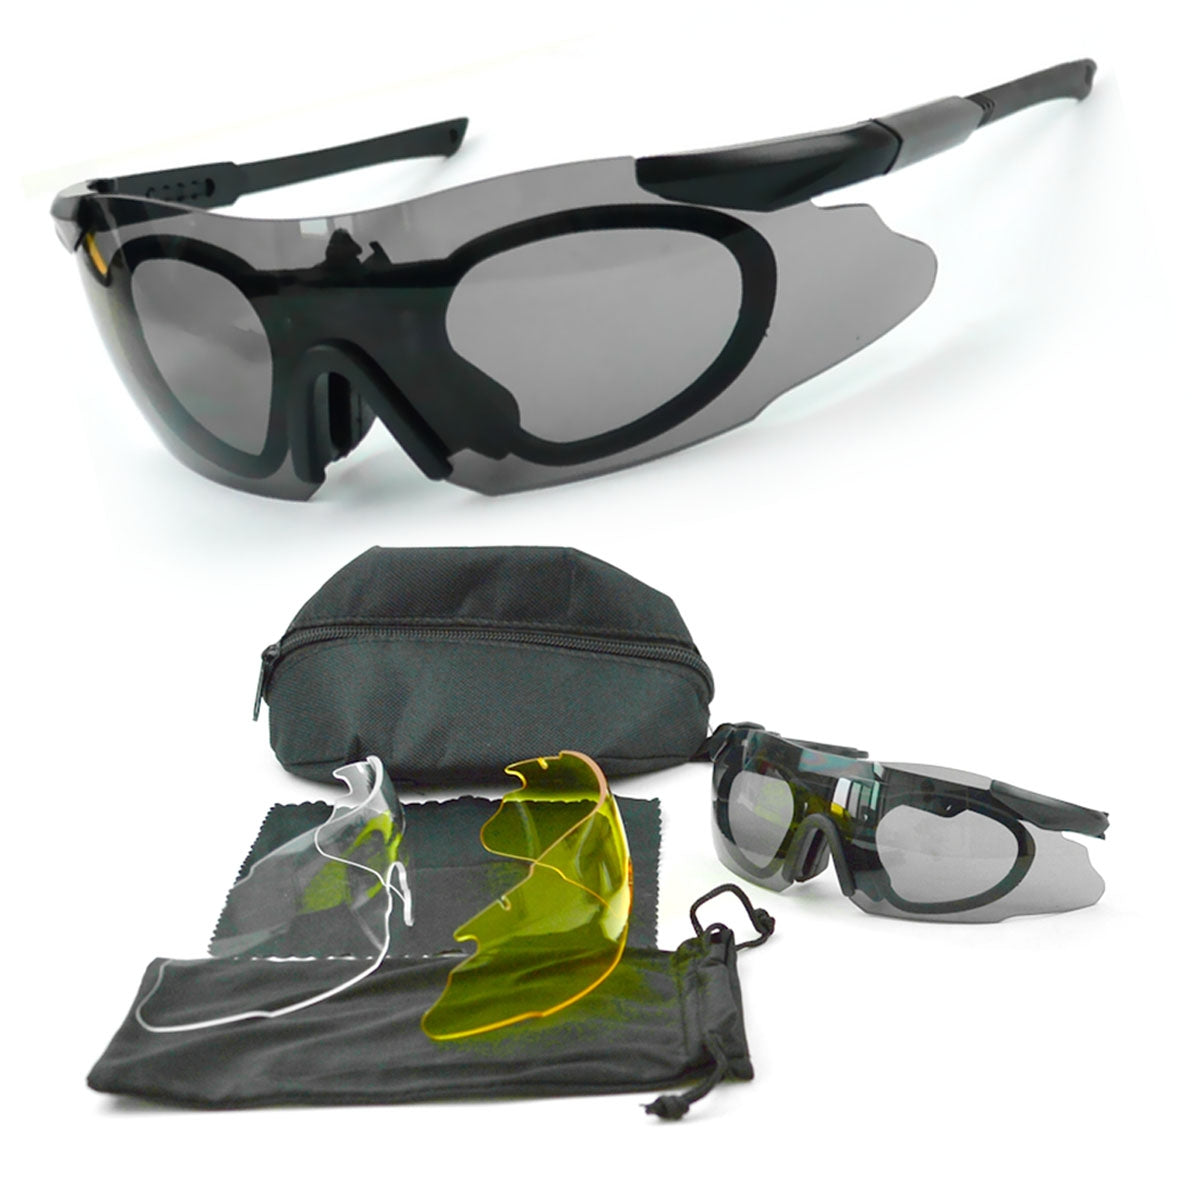 Ultra light thin temple cycling sunglasses with 3 interchangeable color lenses